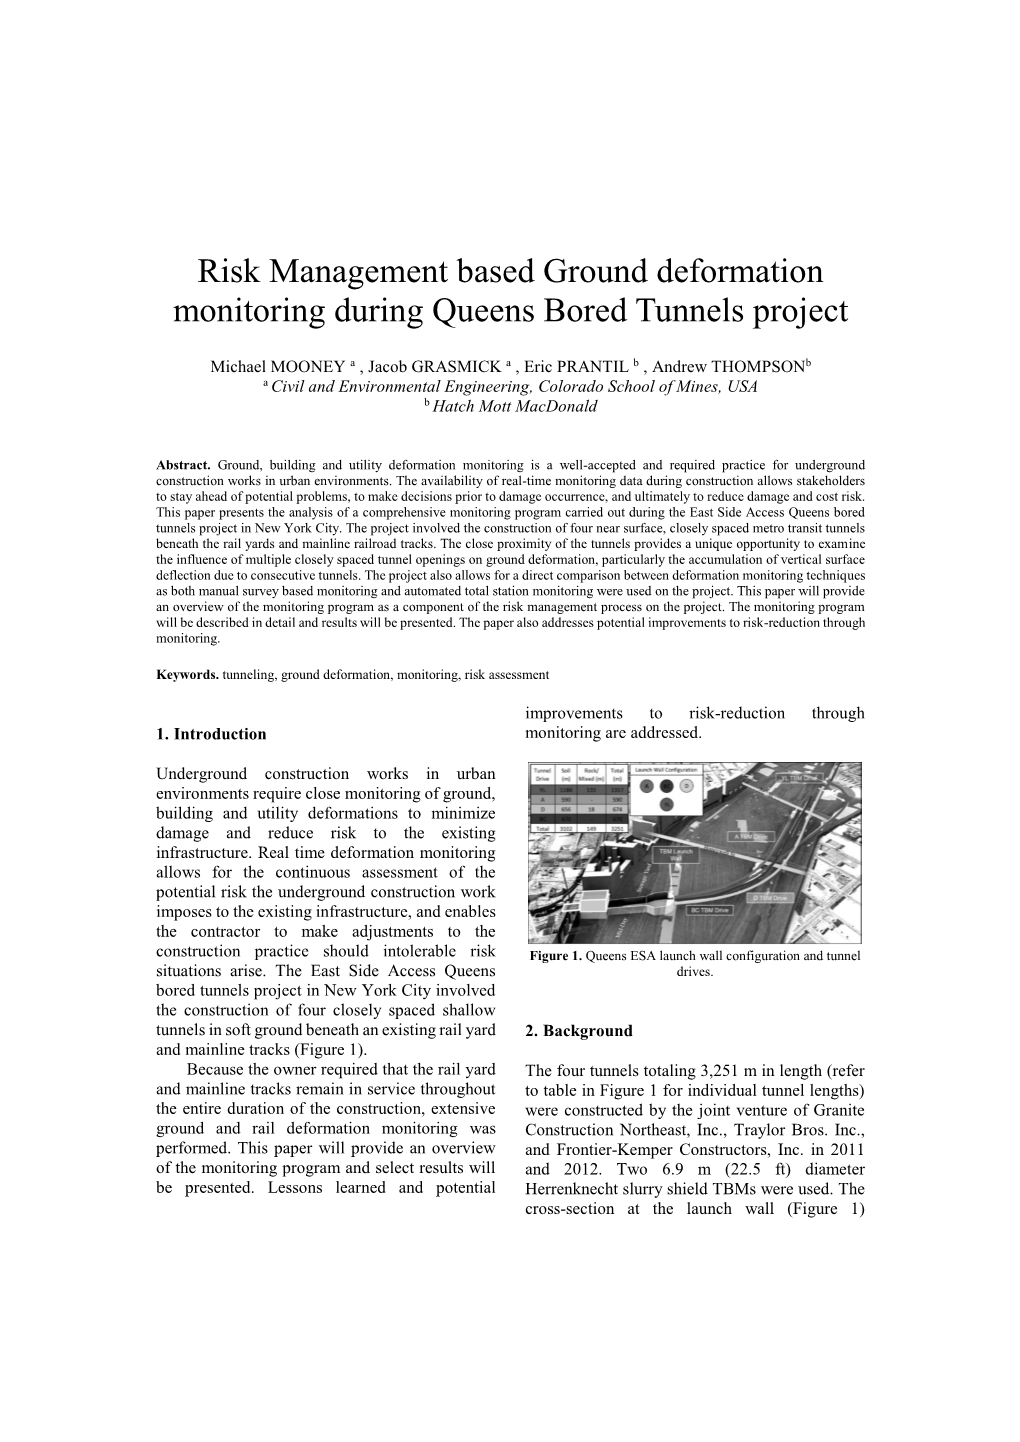 Risk Management Based Ground Deformation Monitoring During Queens Bored Tunnels Project